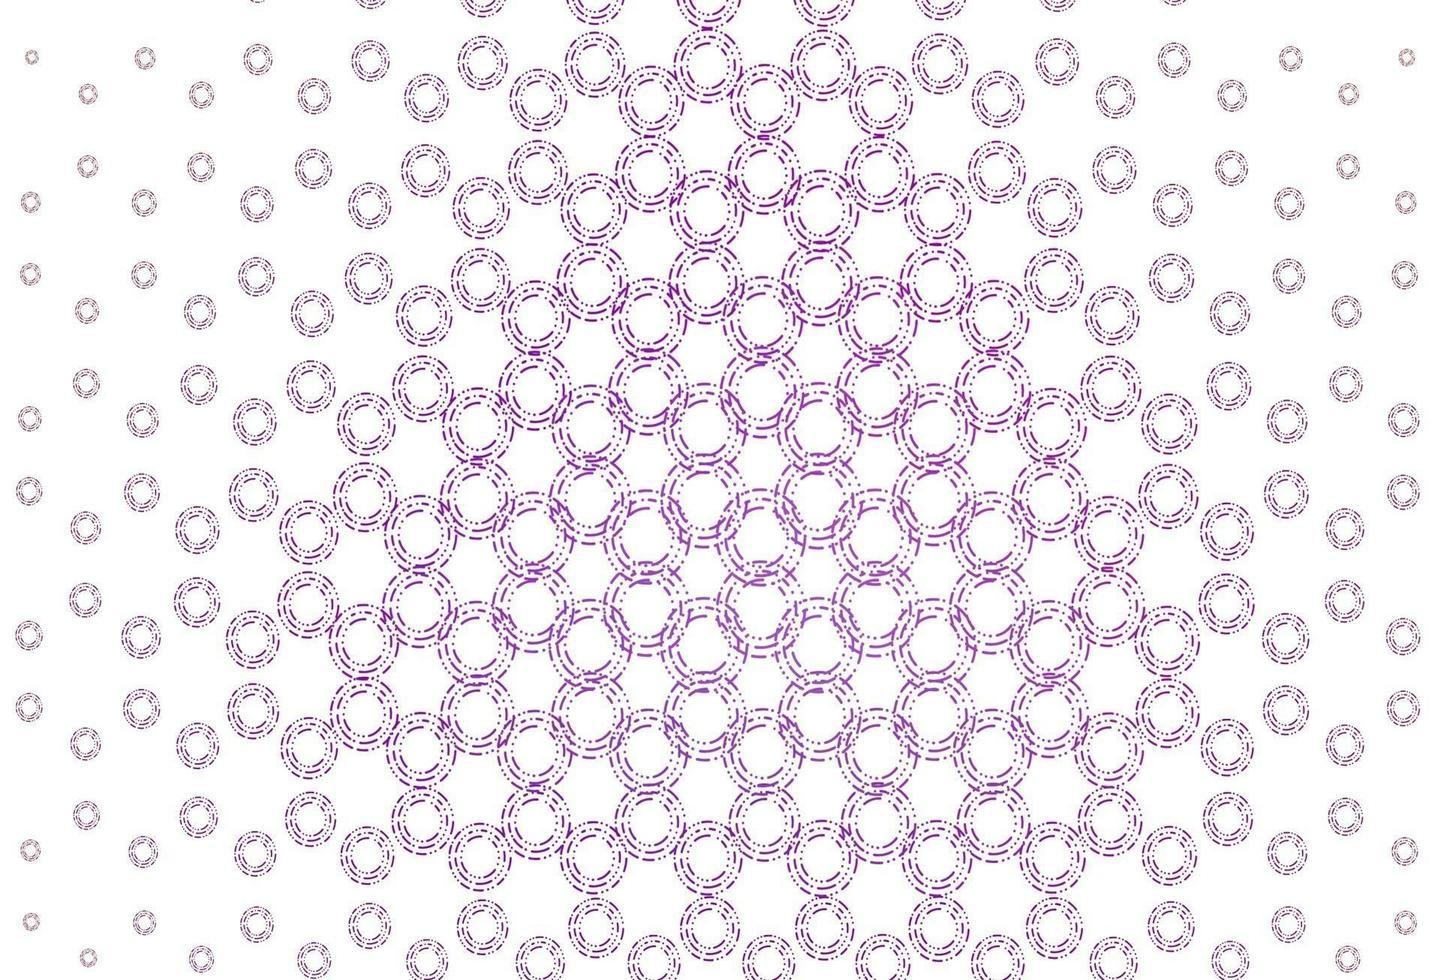 Light purple vector pattern with spheres.